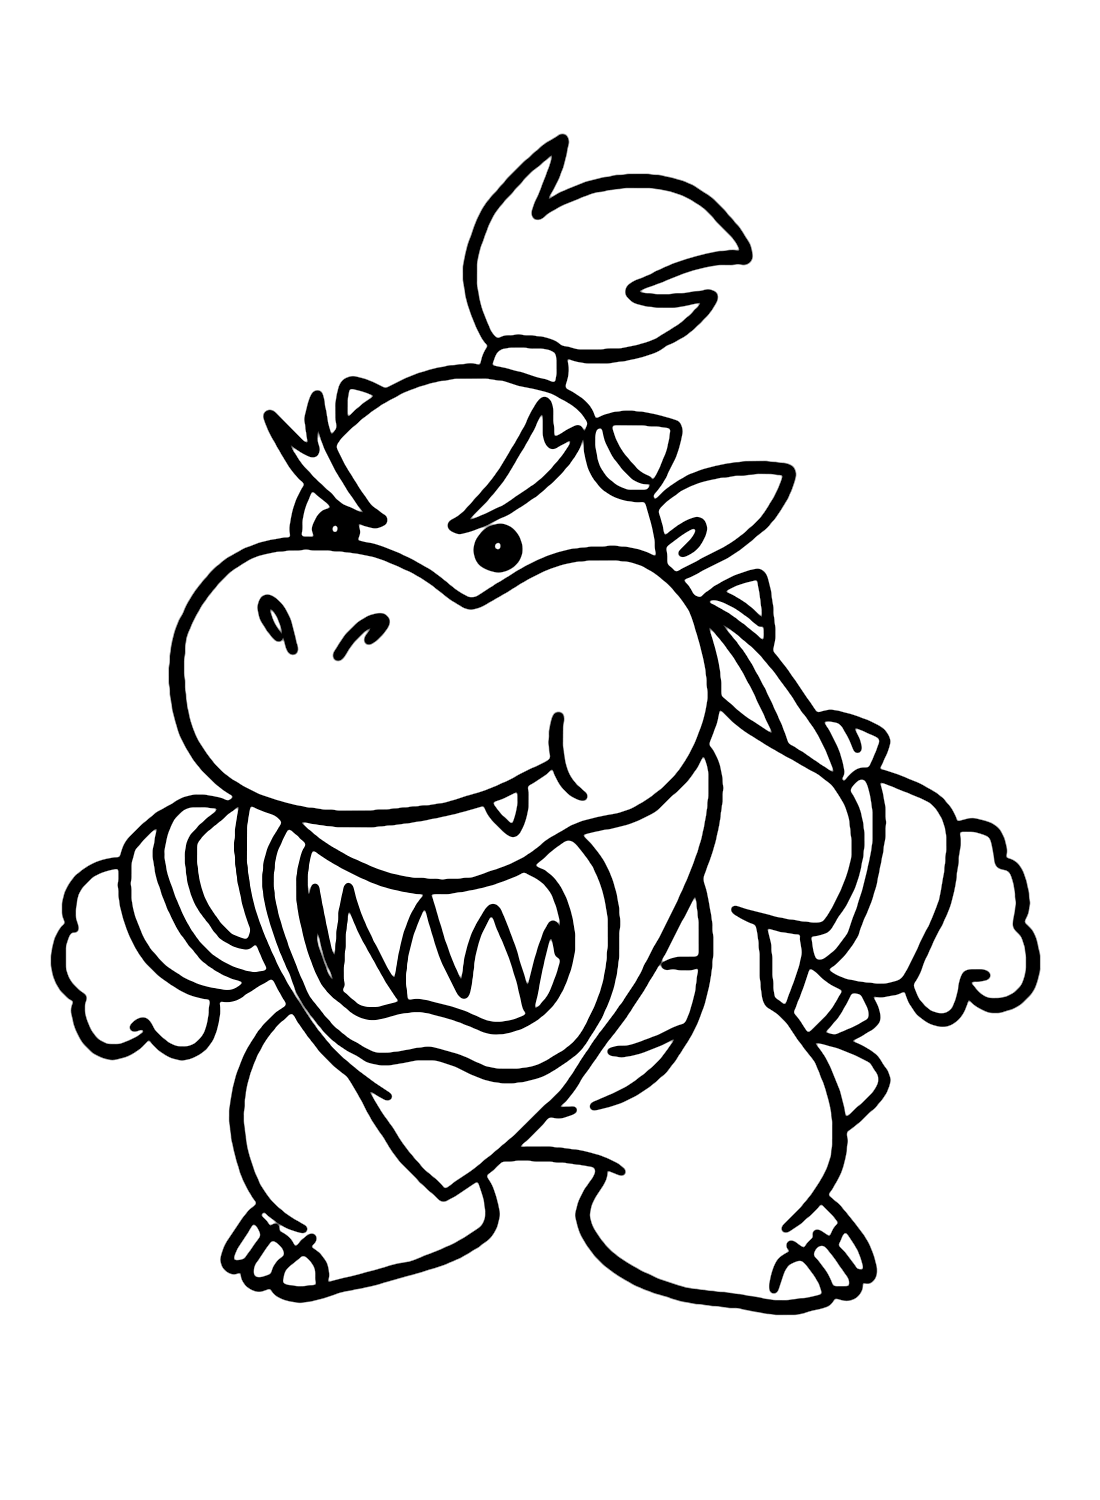 Bowser Junior Coloring Page - Free Printable Coloring Pages